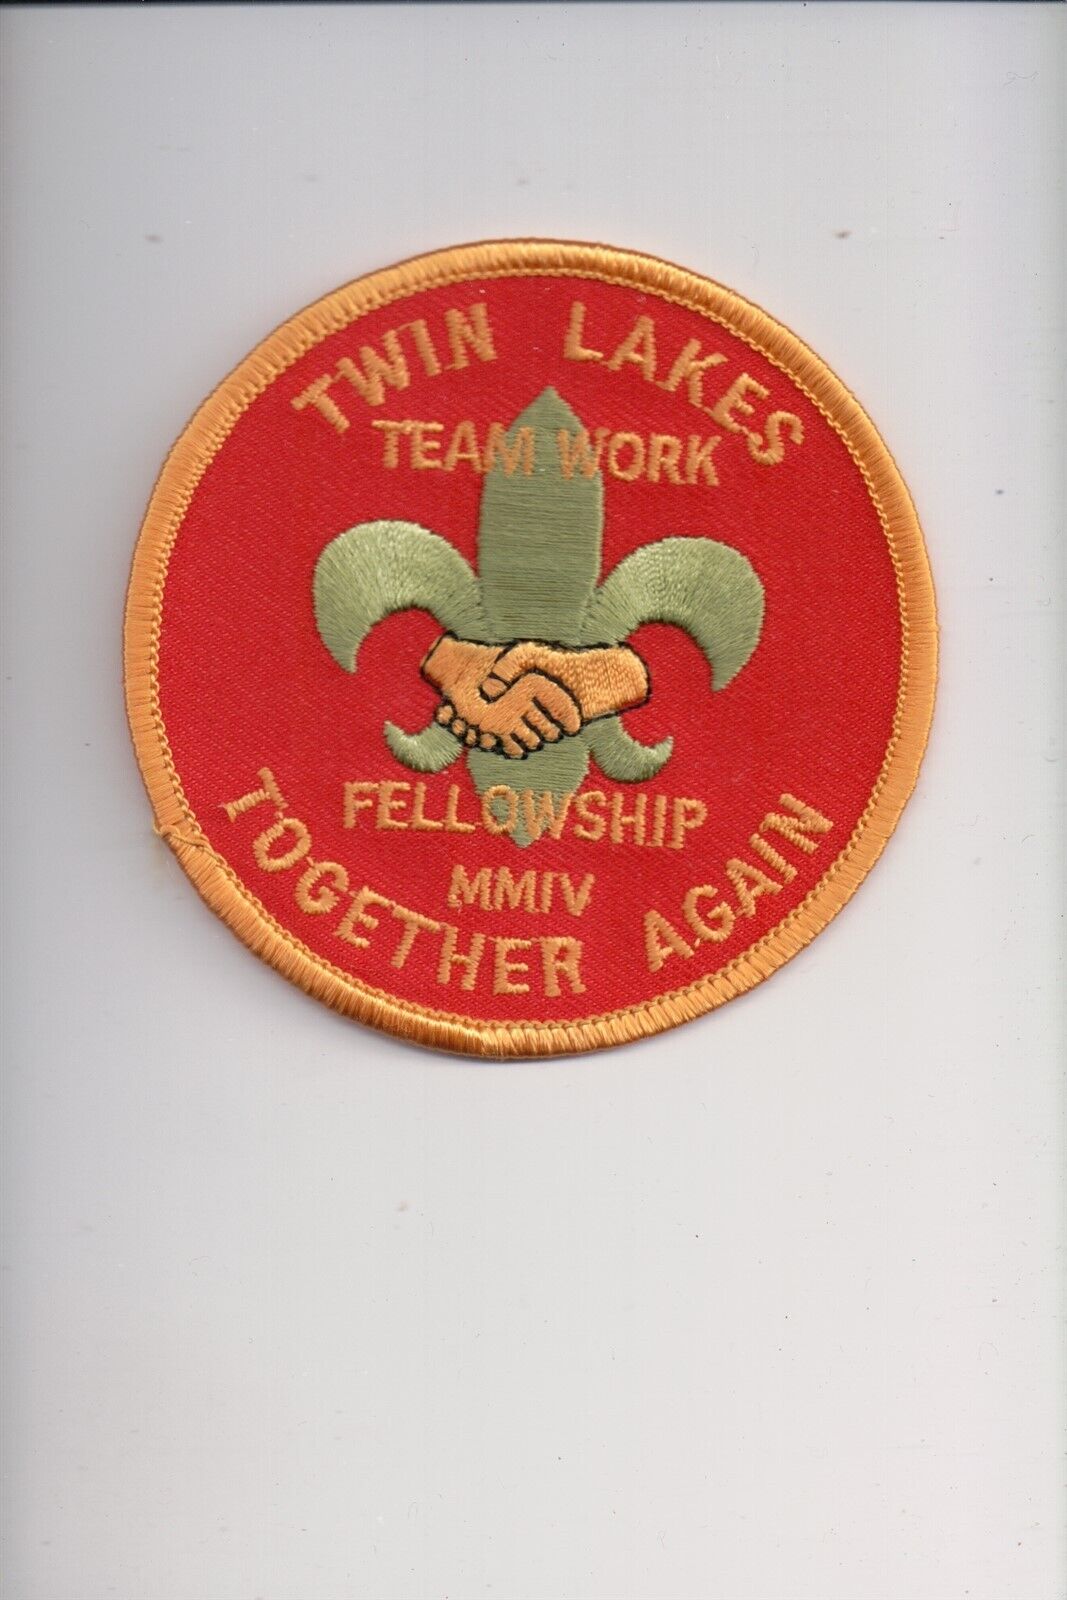 Twin Lakes Team Work Fellowship Together Again patch